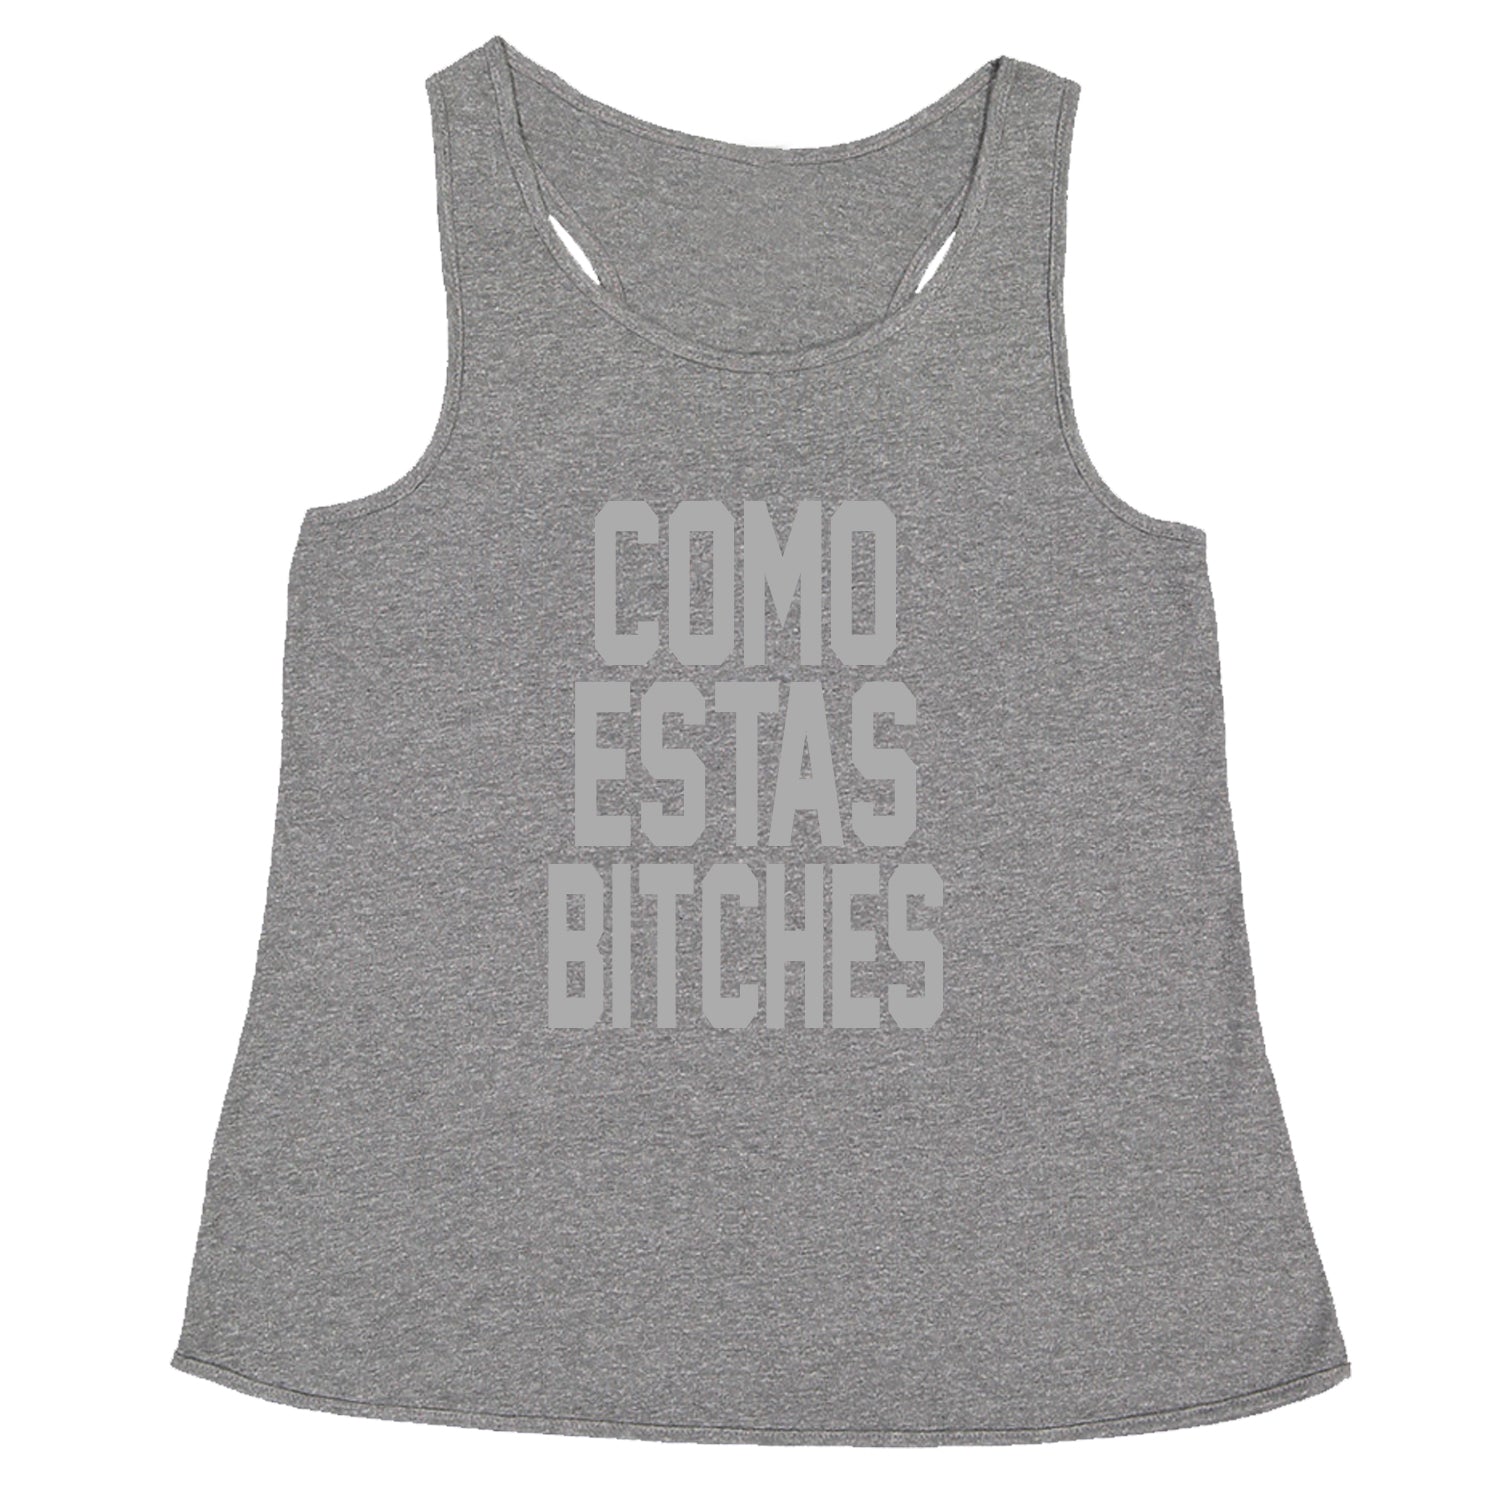 Como Estas B-tches Racerback Tank Top for Women #expressiontees by Expression Tees